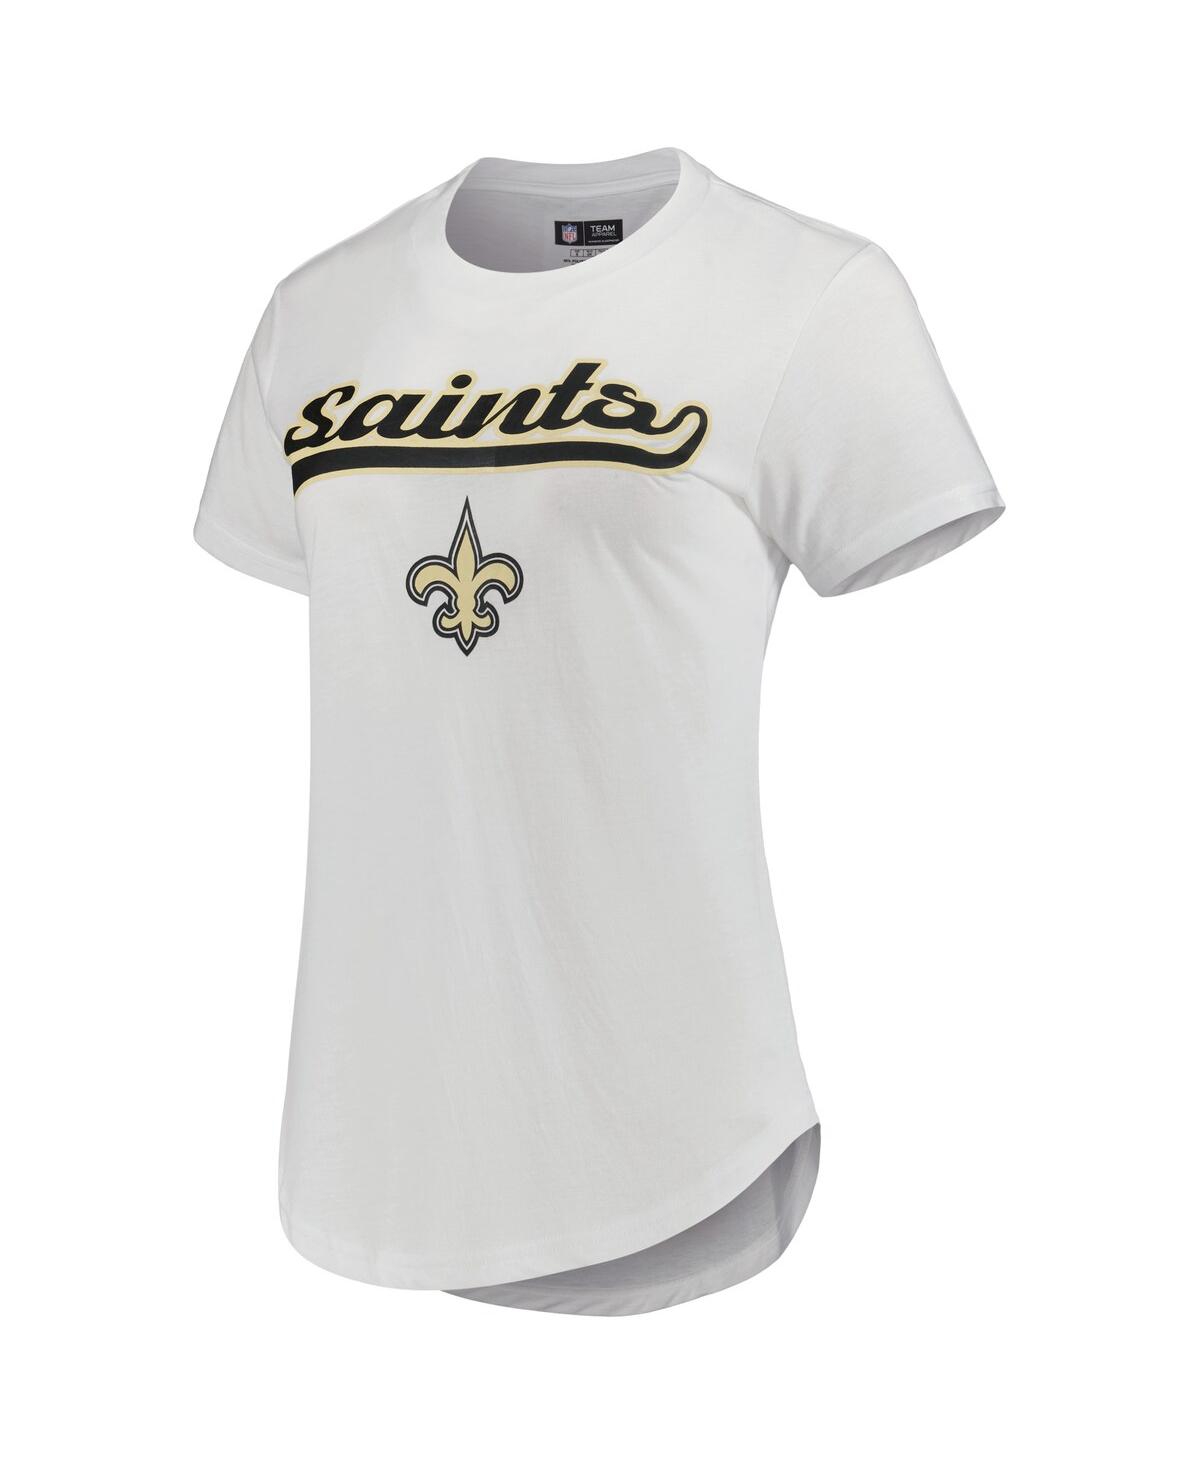 Shop Concepts Sport Women's  White, Charcoal New Orleans Saints Sonata T-shirt And Leggings Sleep Set In White,charcoal